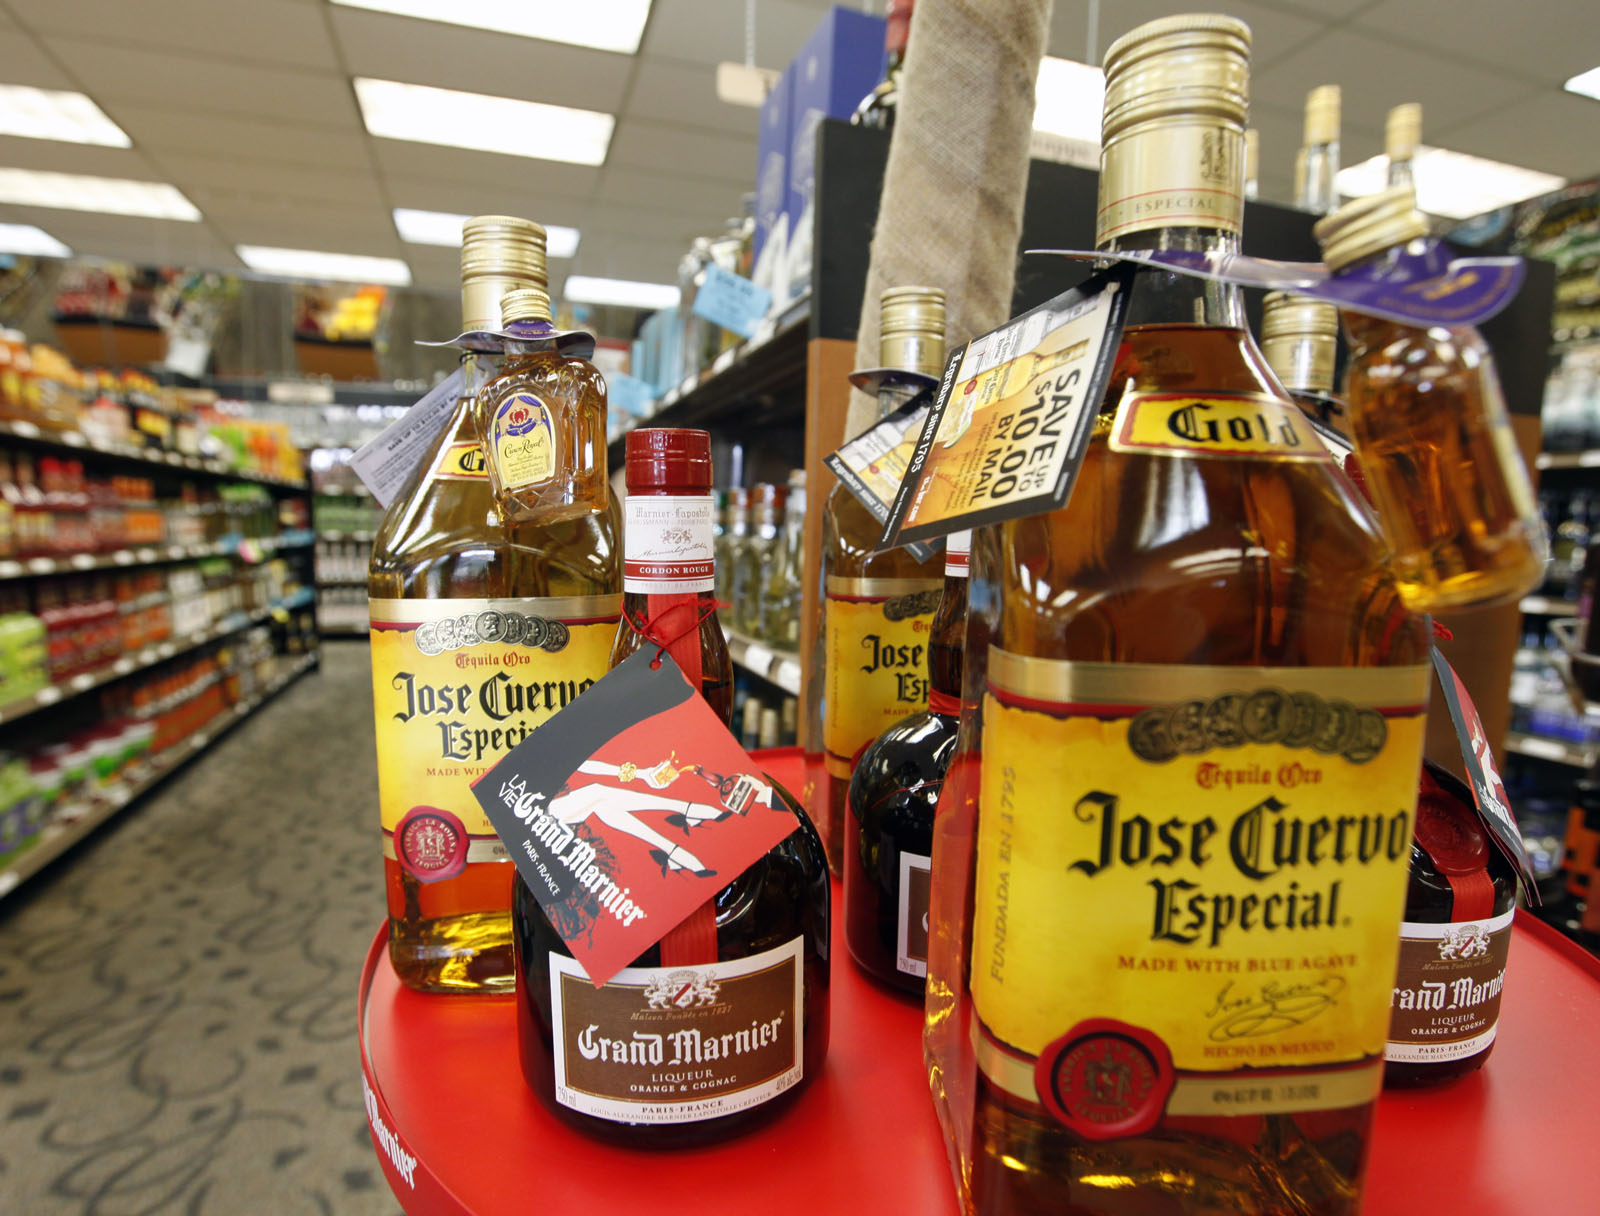 New state law on earlier Sunday liquor sales goes into effect this weekend  - WV MetroNews